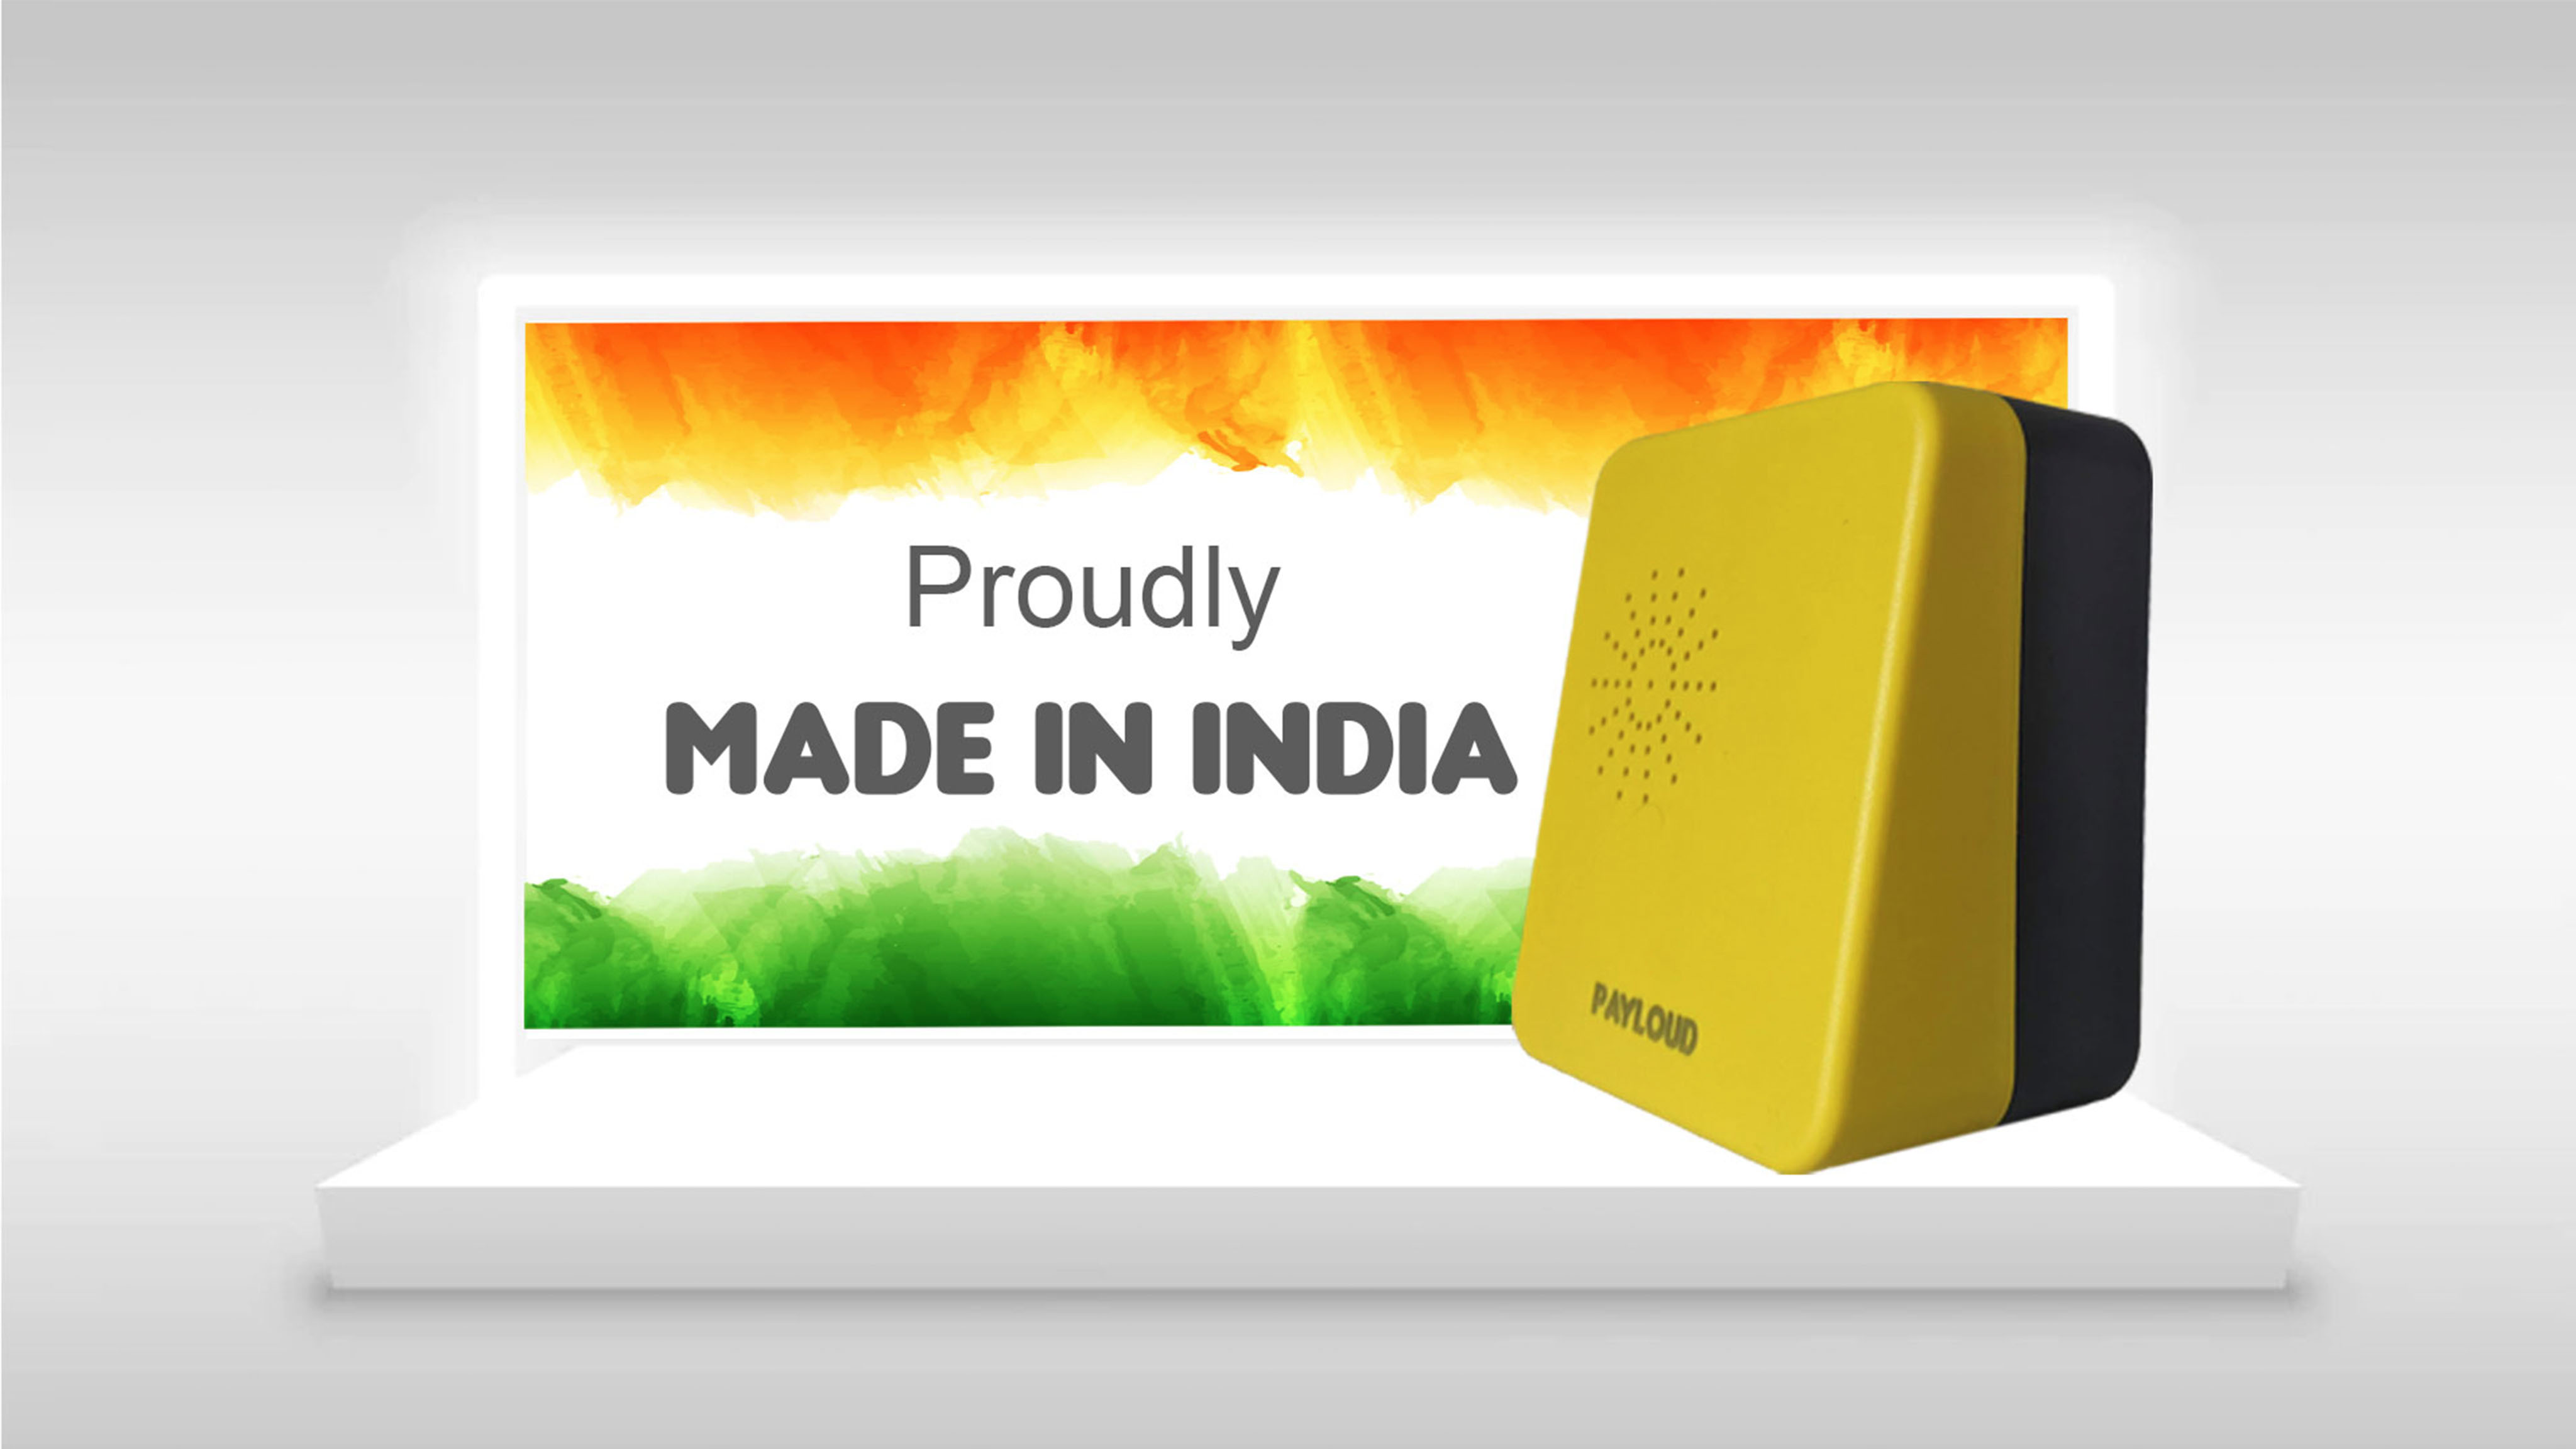 About Made in India